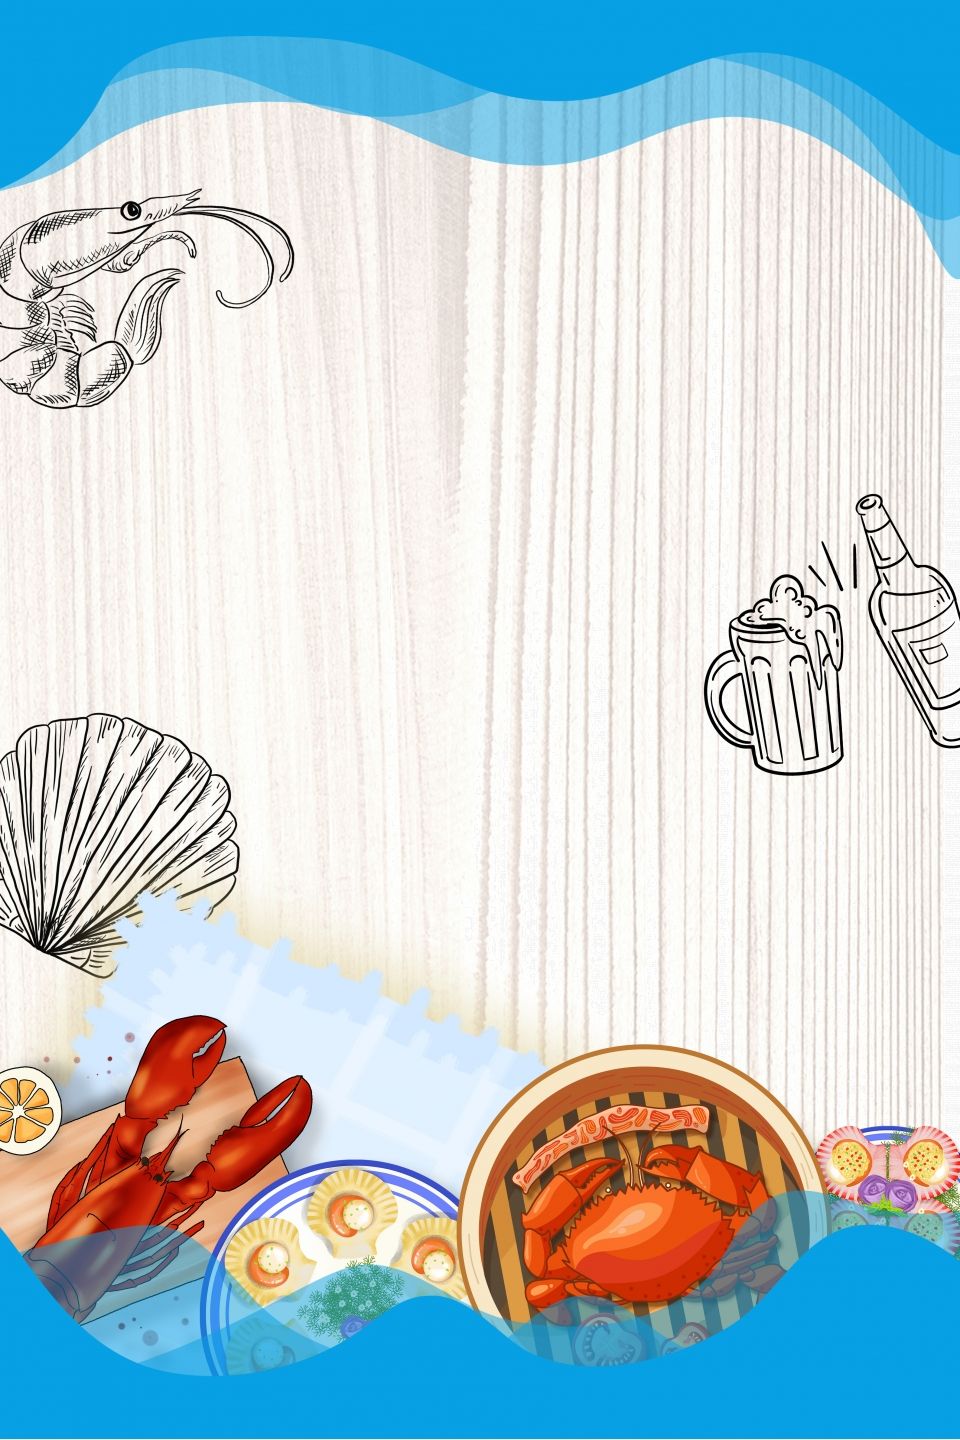 Gourmet Seafood Buffet Promotion Poster Background. Seafood buffet, Seafood art, Food poster design